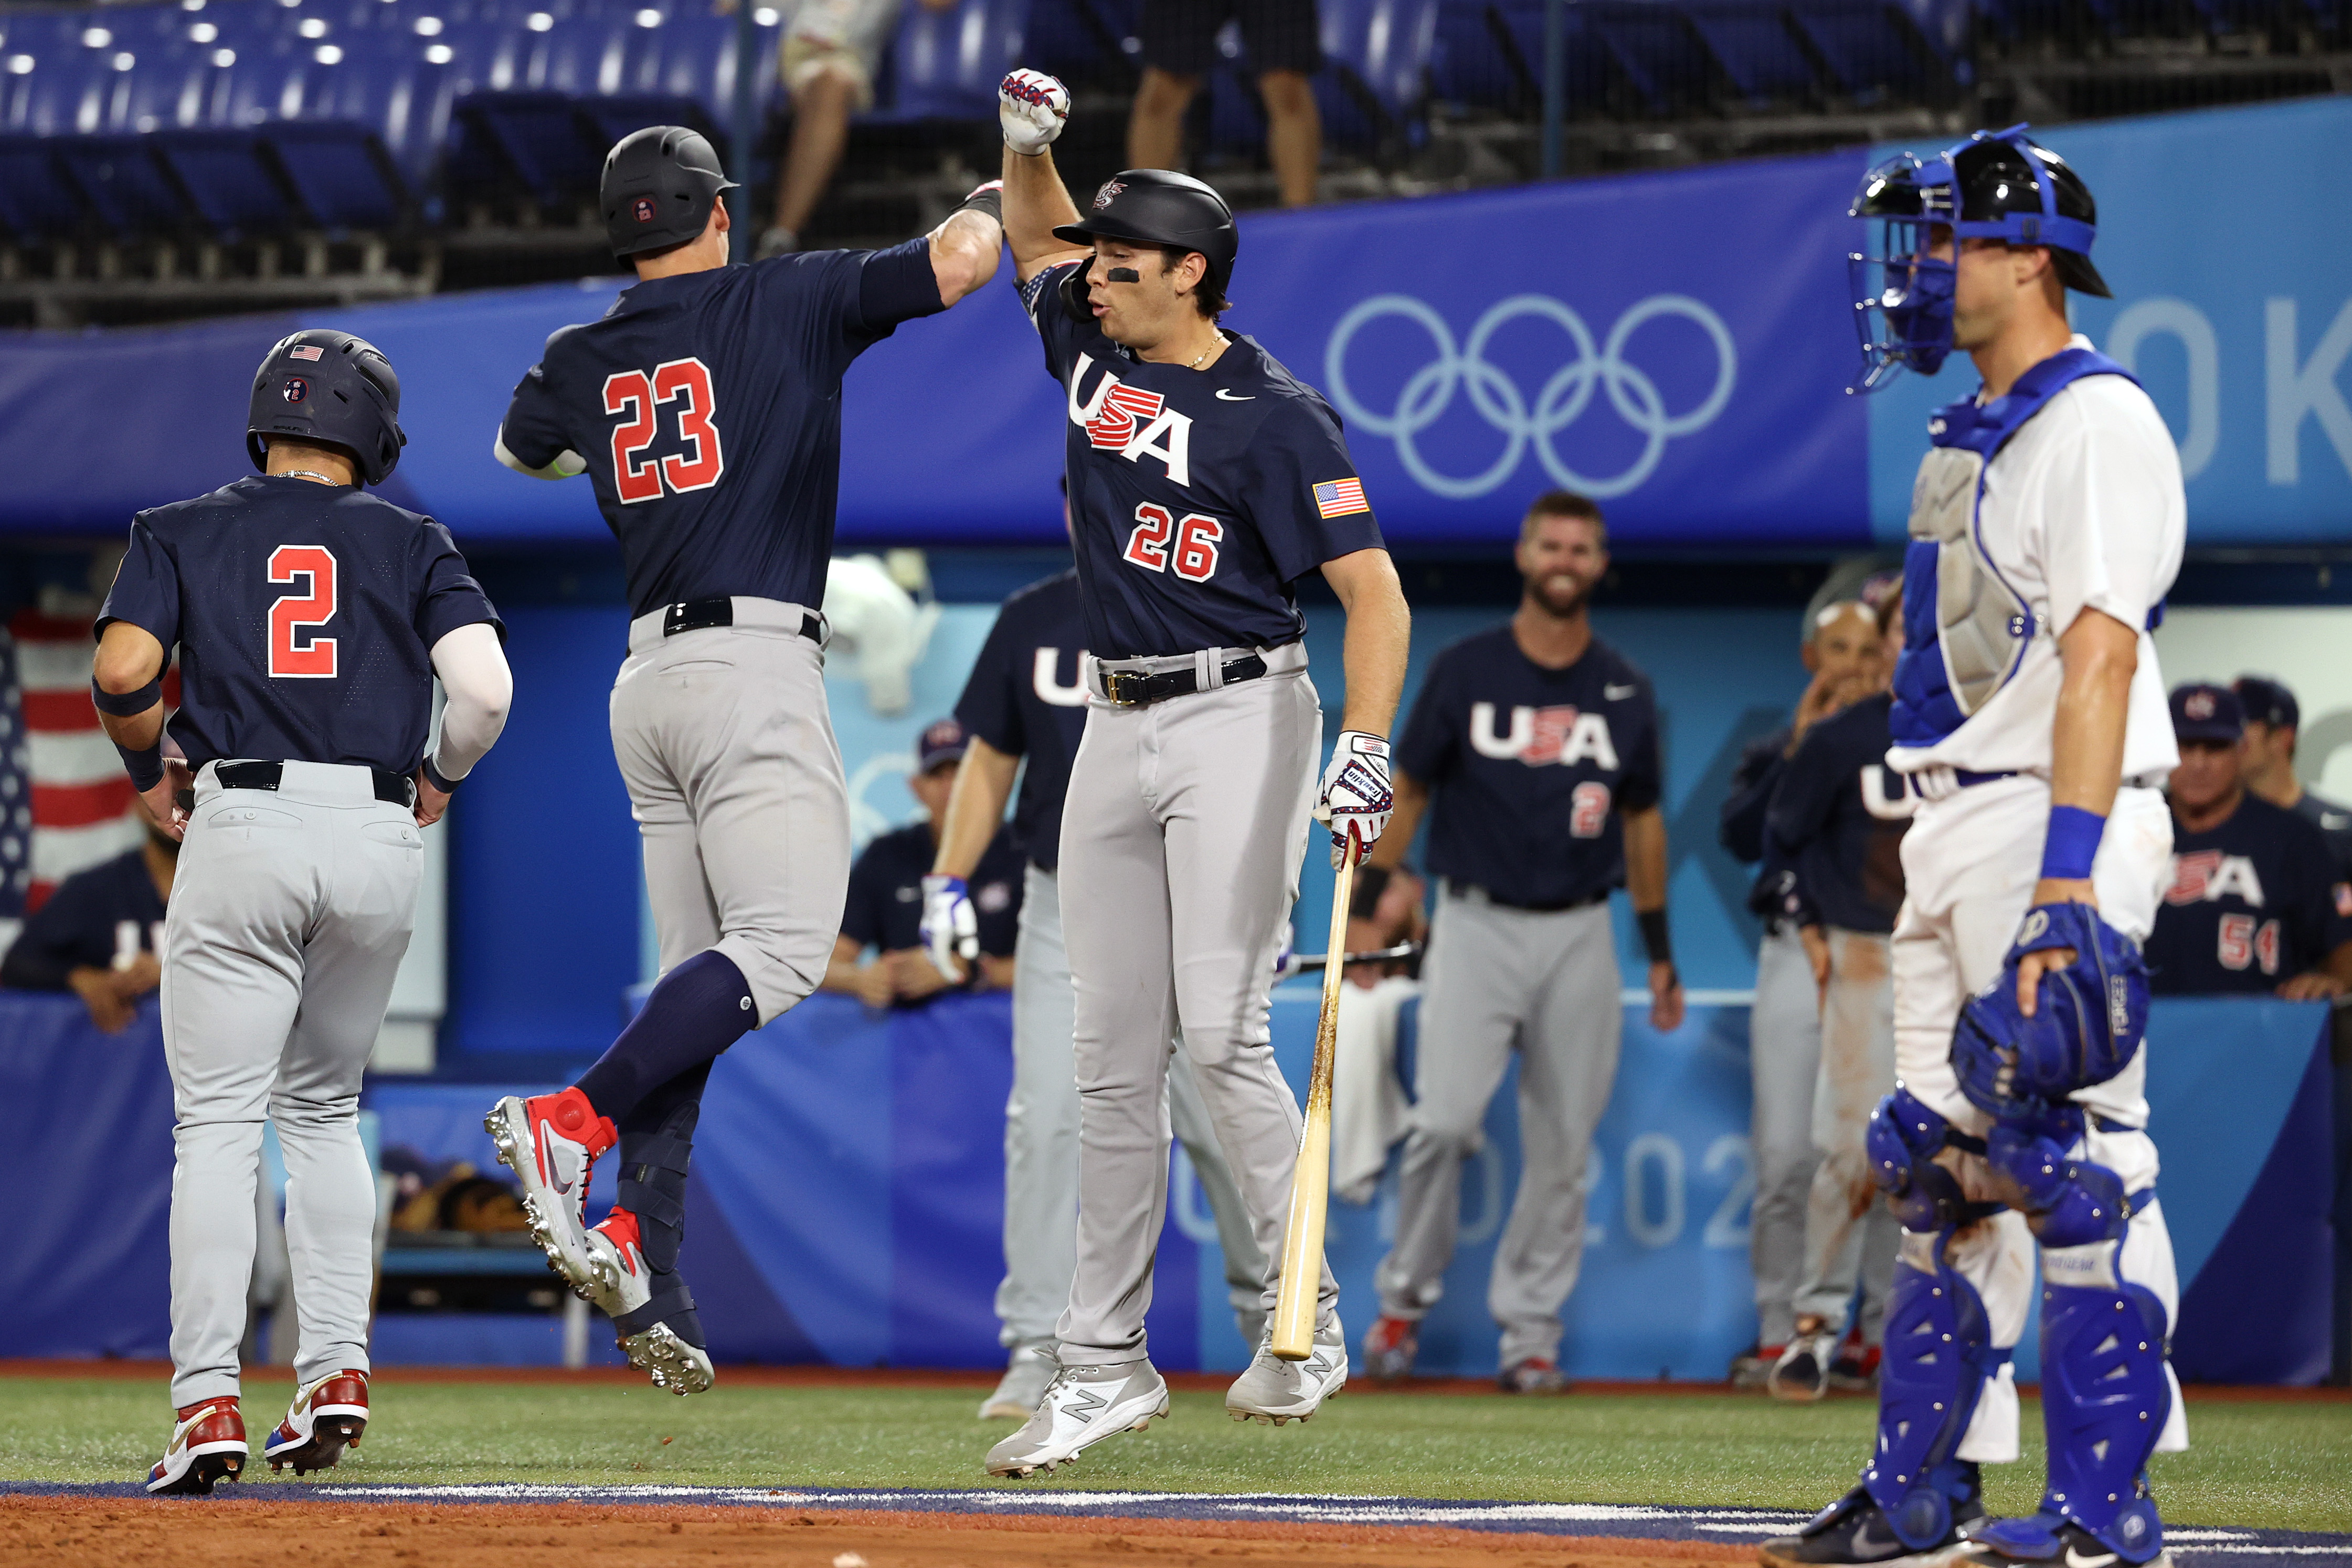 Olympic Baseball 21 Team Usa Defeats Israel To Open Group Play Bleacher Report Latest News Videos And Highlights